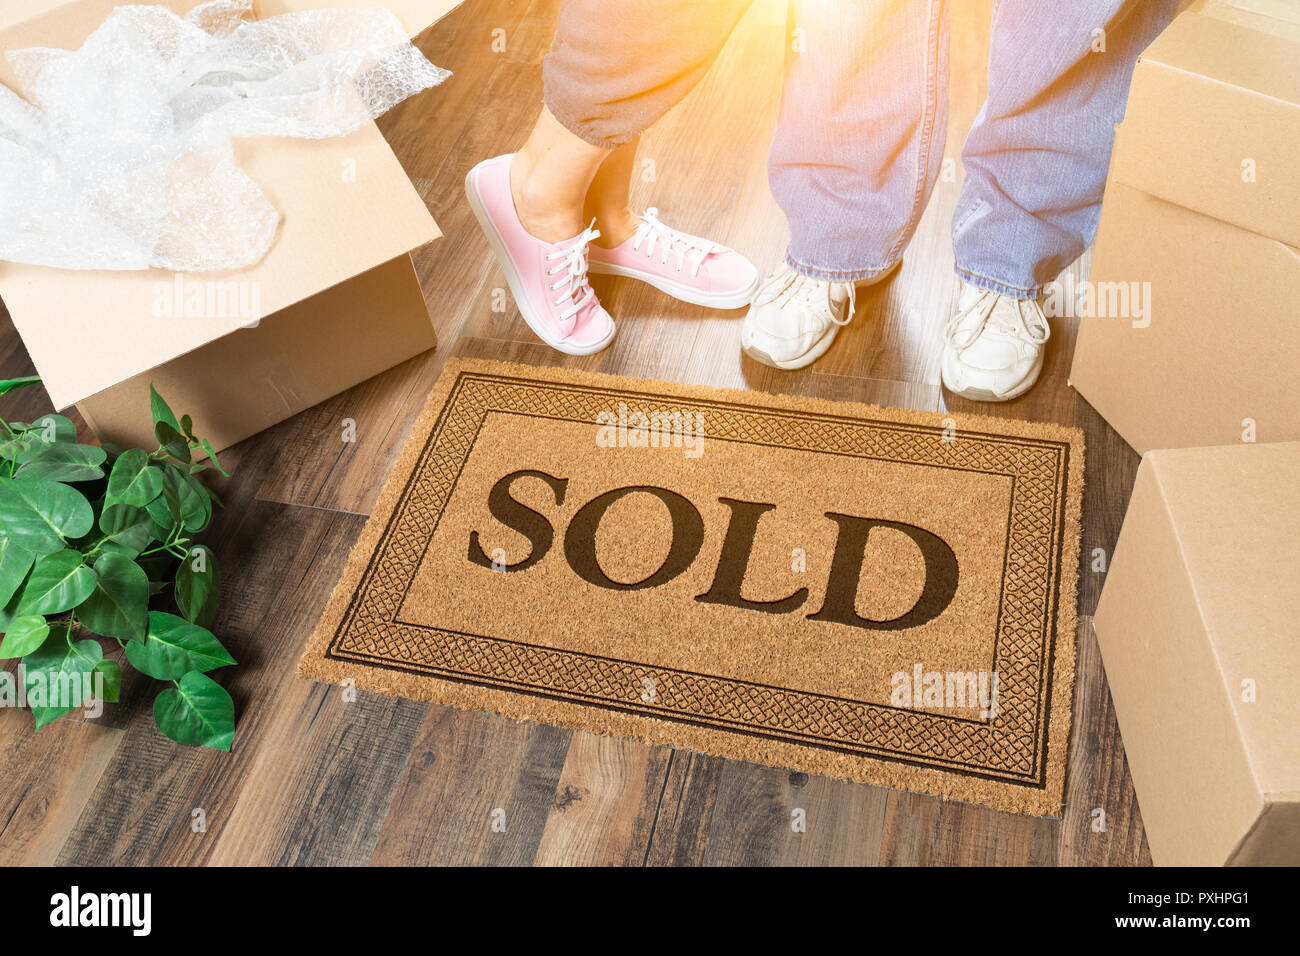 Man and Woman Standing Near Sold Welcome Mat, Moving Boxes and Plant. Stock Photo